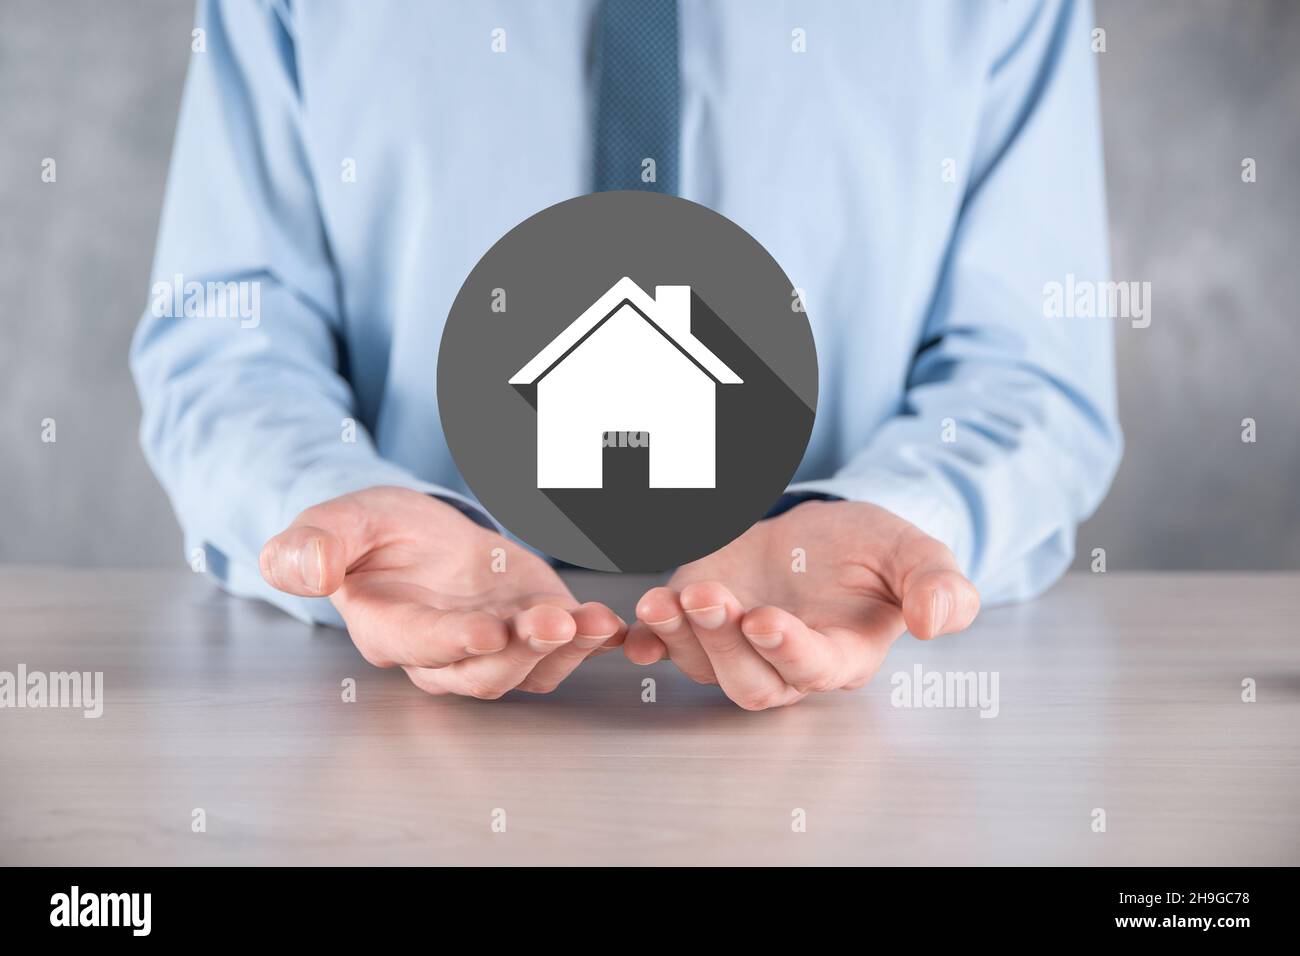 Real estate concept, businessman holding a house icon.House on Hand.Property insurance and security concept. Protecting gesture of man and symbol of h Stock Photo